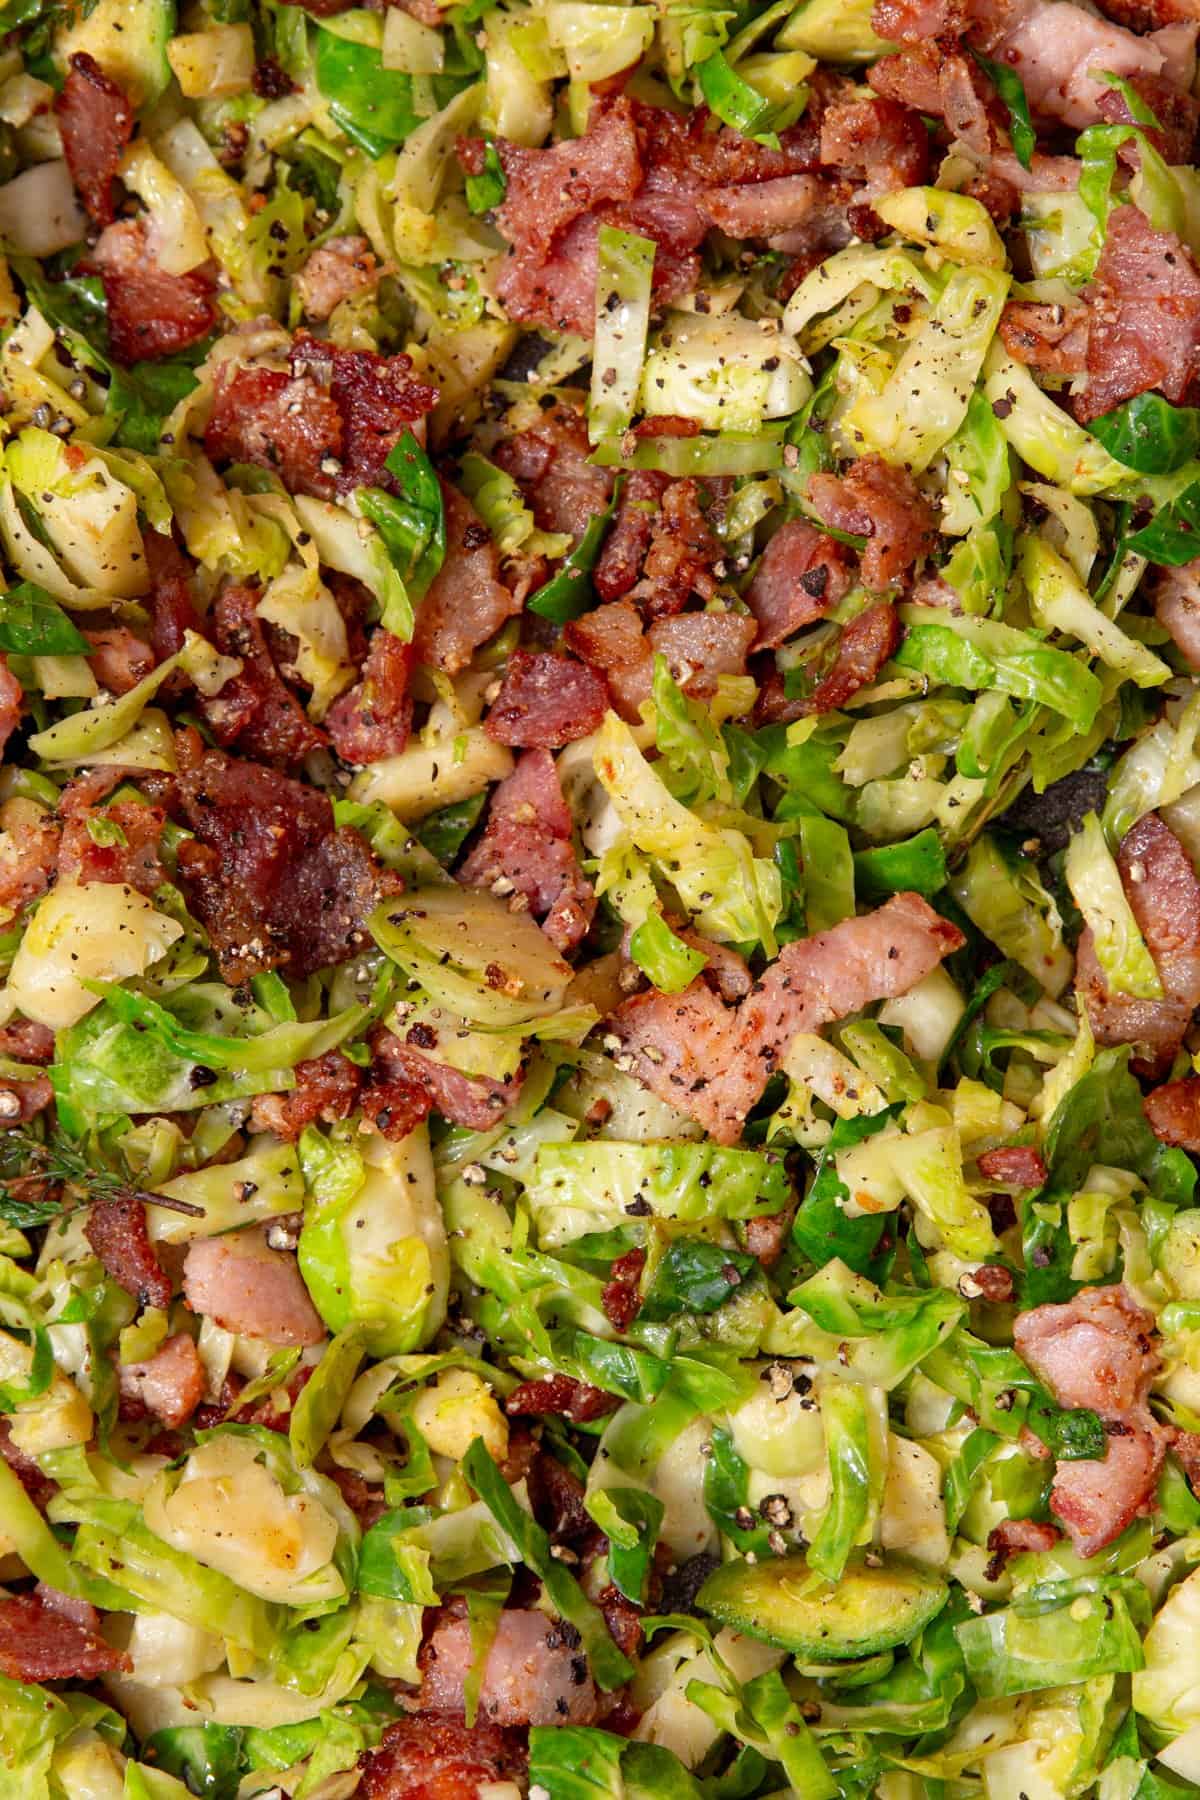 Sliced and cooked Brussel sprouts with lots of browned bacon pieces  topped with pepper.